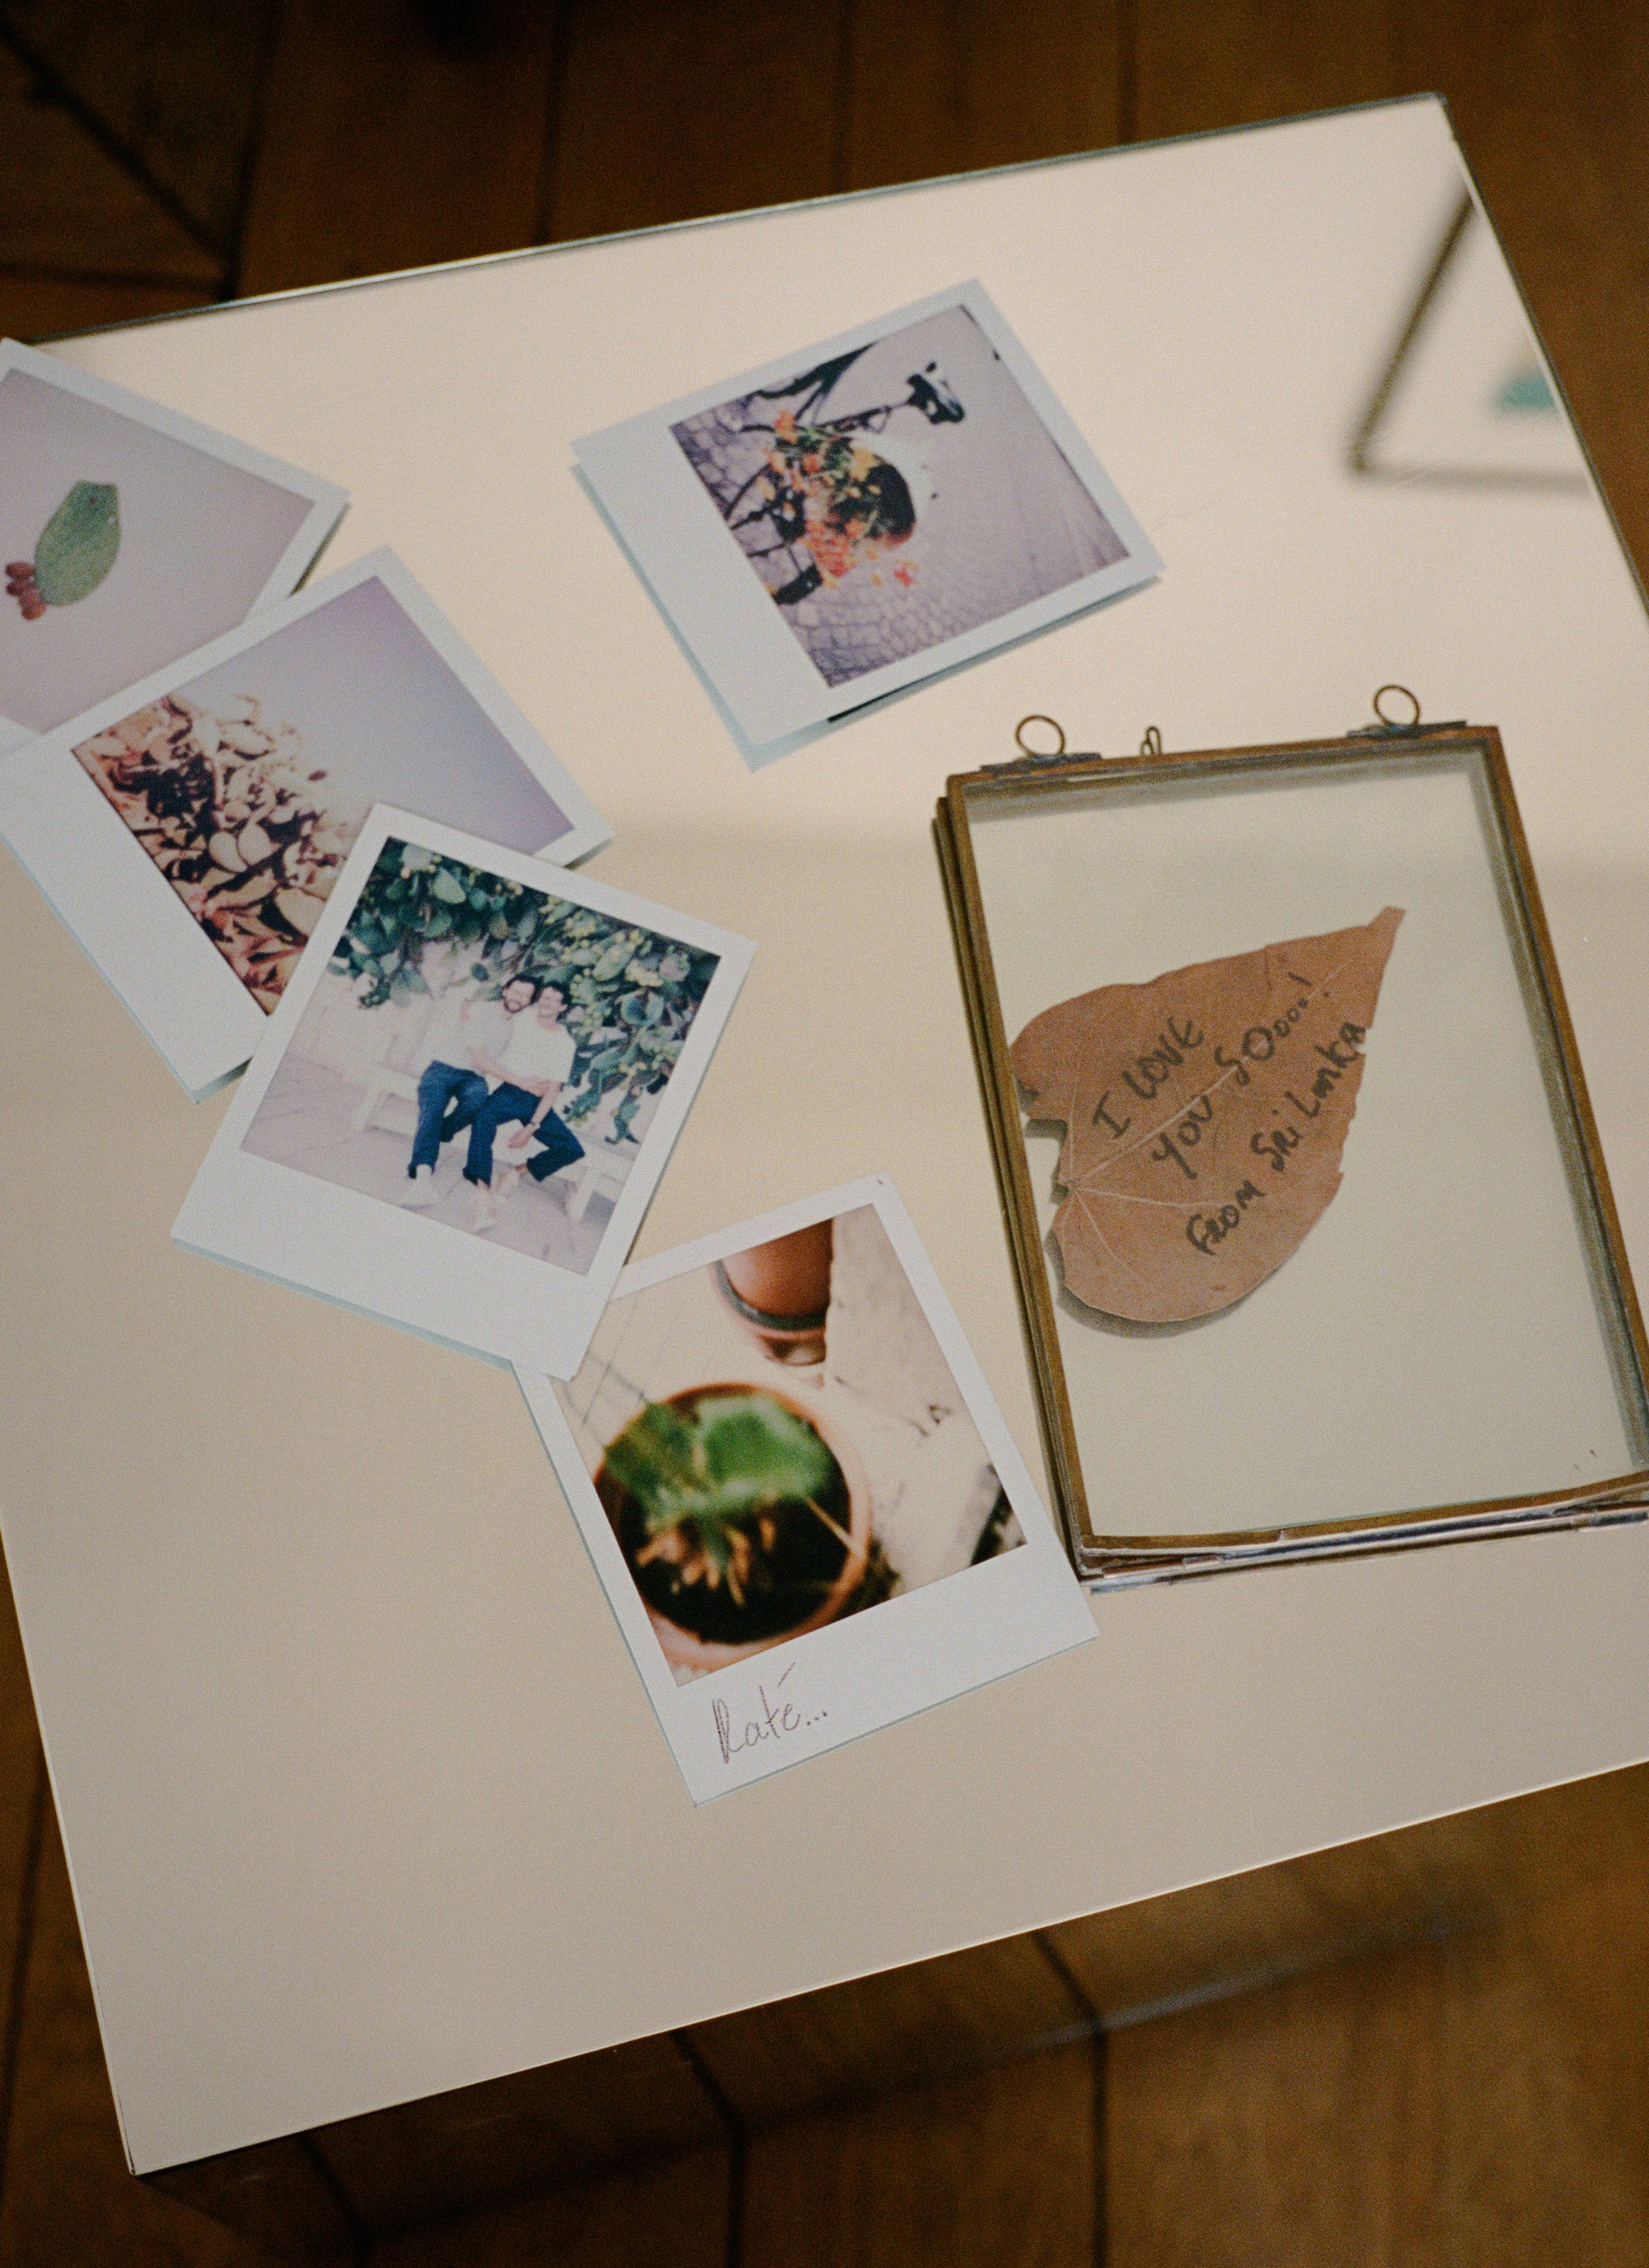 5 pictures of Polaroids on the mirror box with a dried leaf in a sample-like packaging.